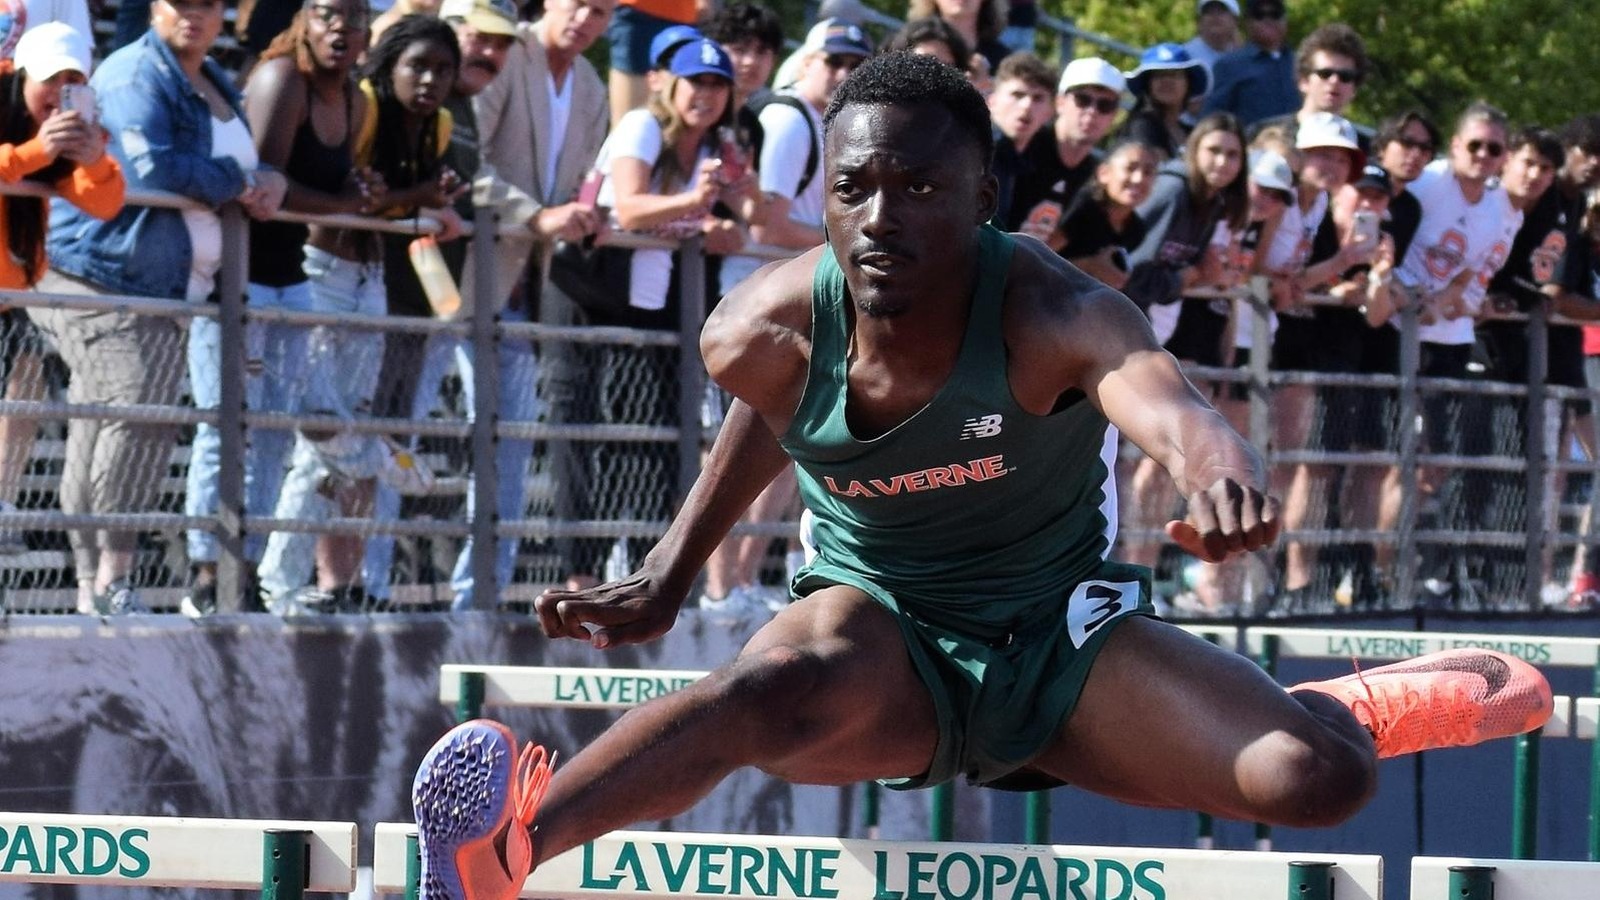 Leopards Finish Fifth At SCIAC Track & Field Championships